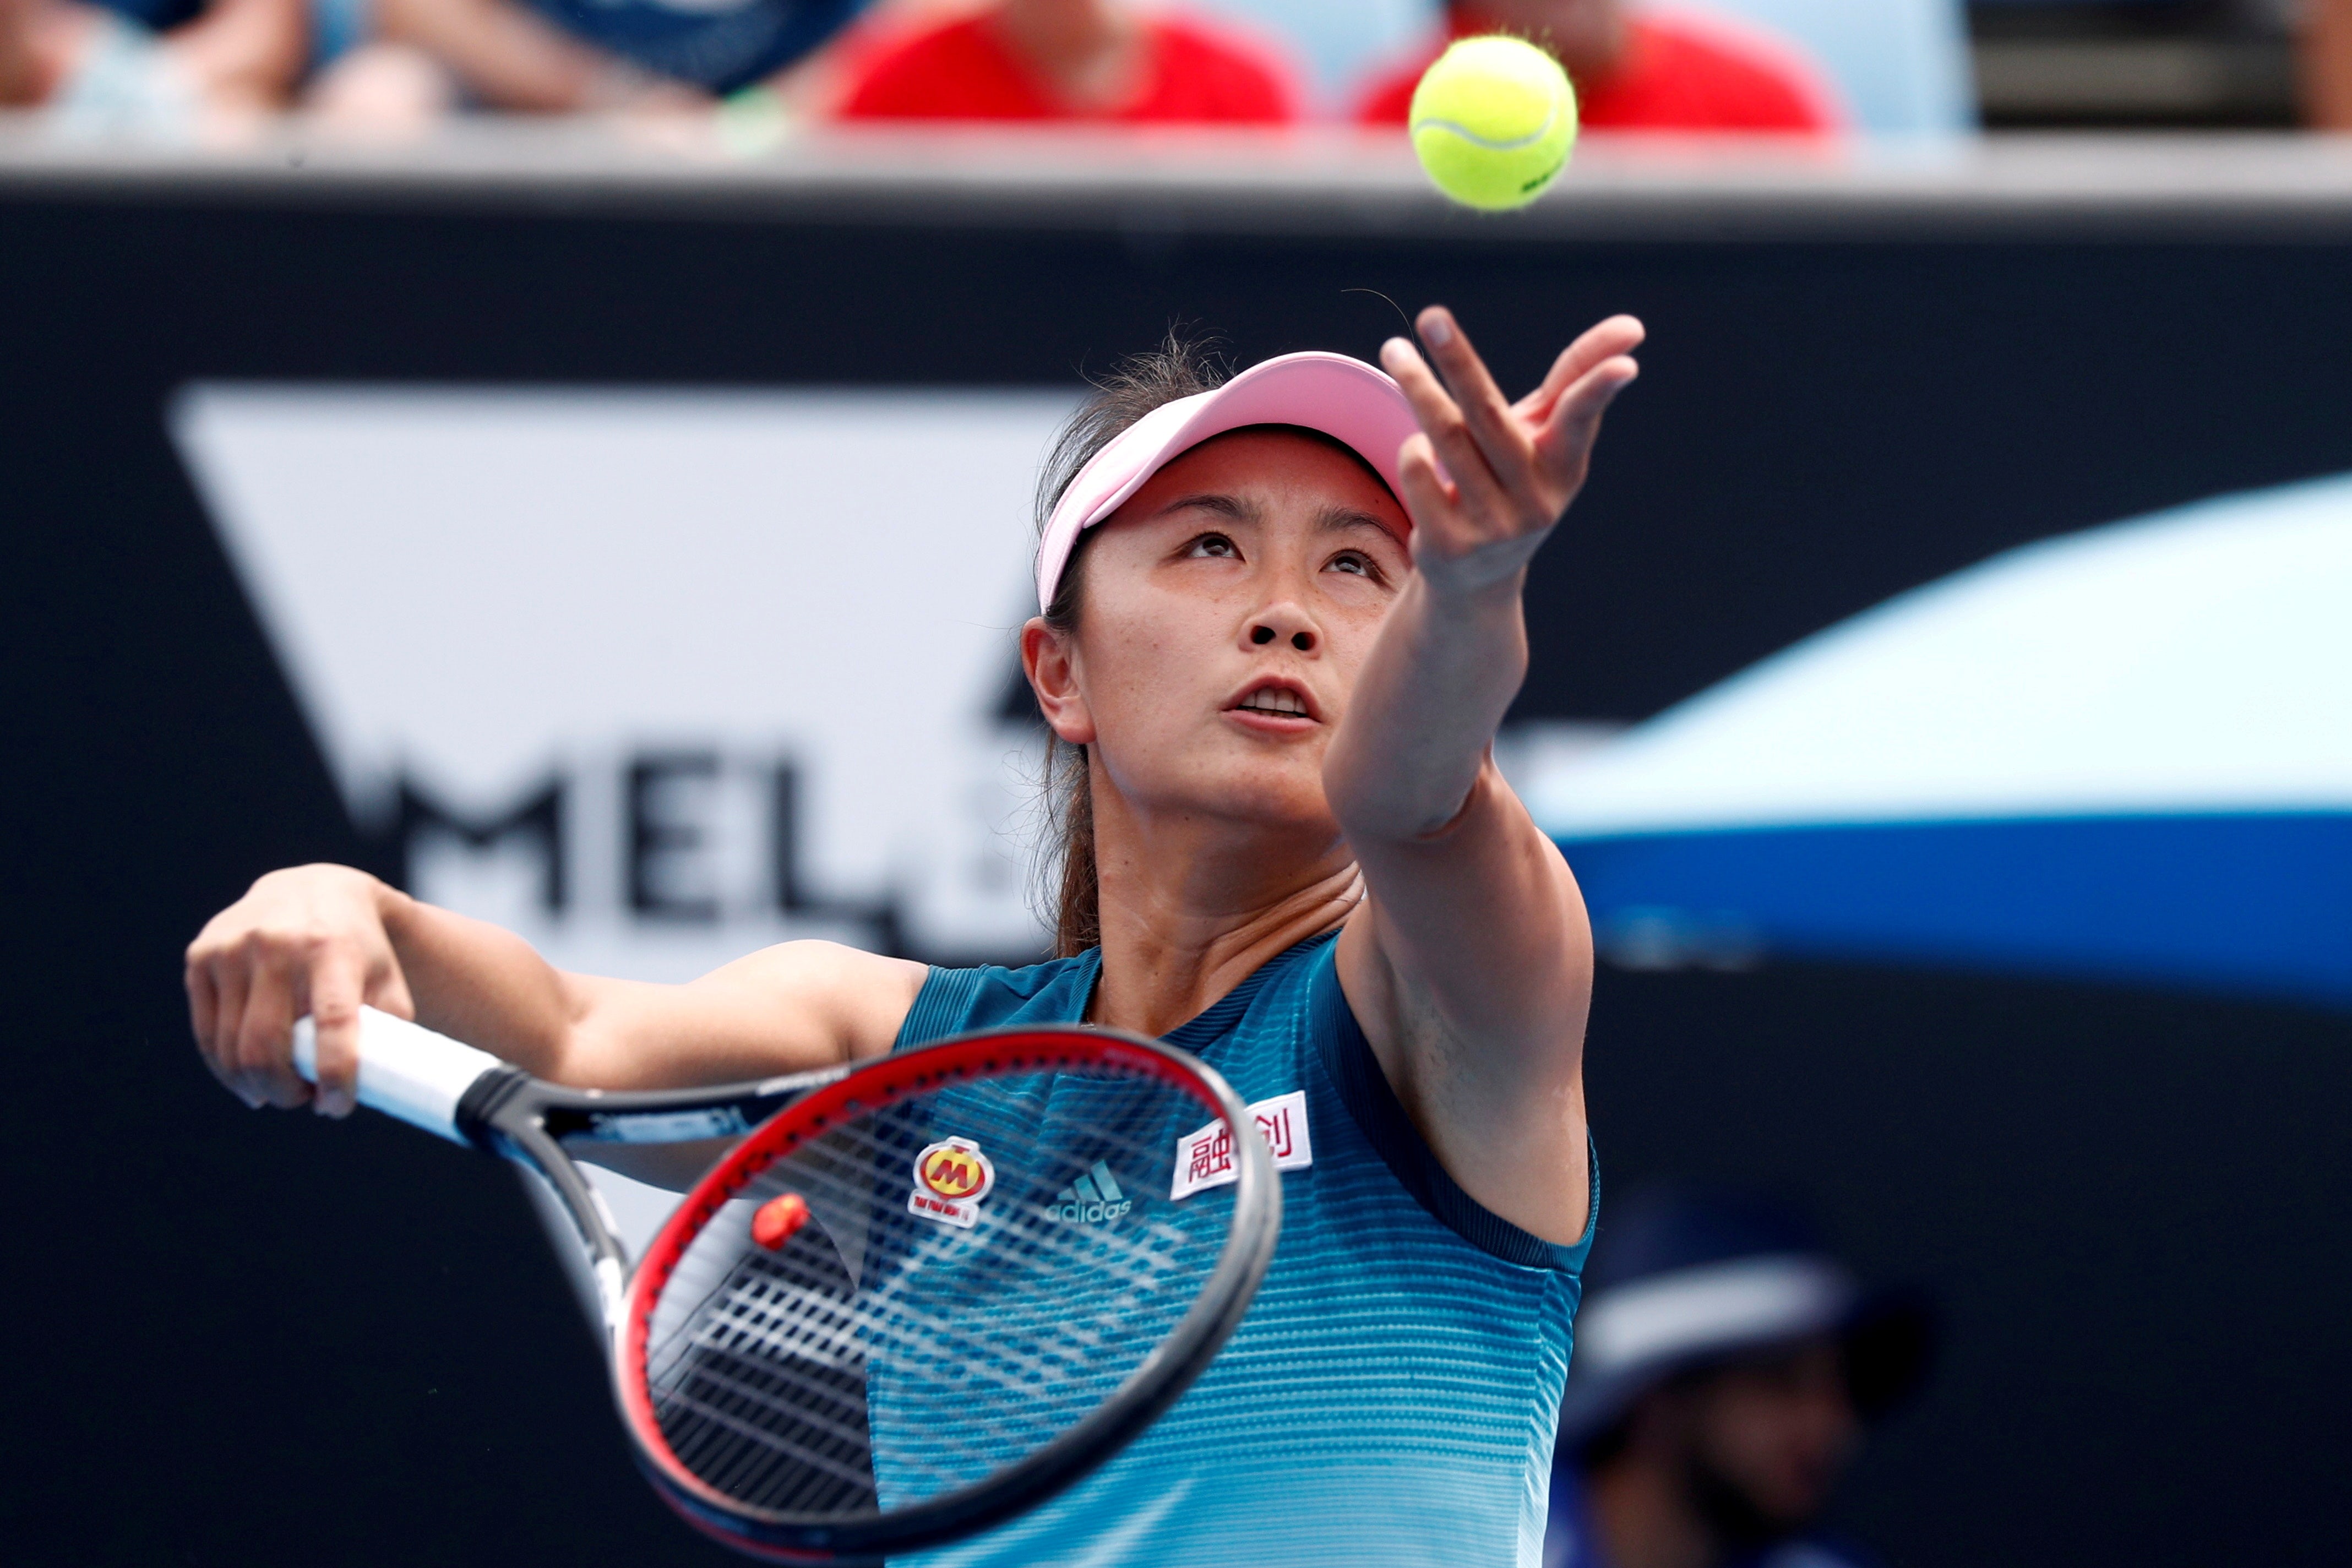 WTA stands up to China over Peng Shuai, demonstrates moral leadership desperately needed in West